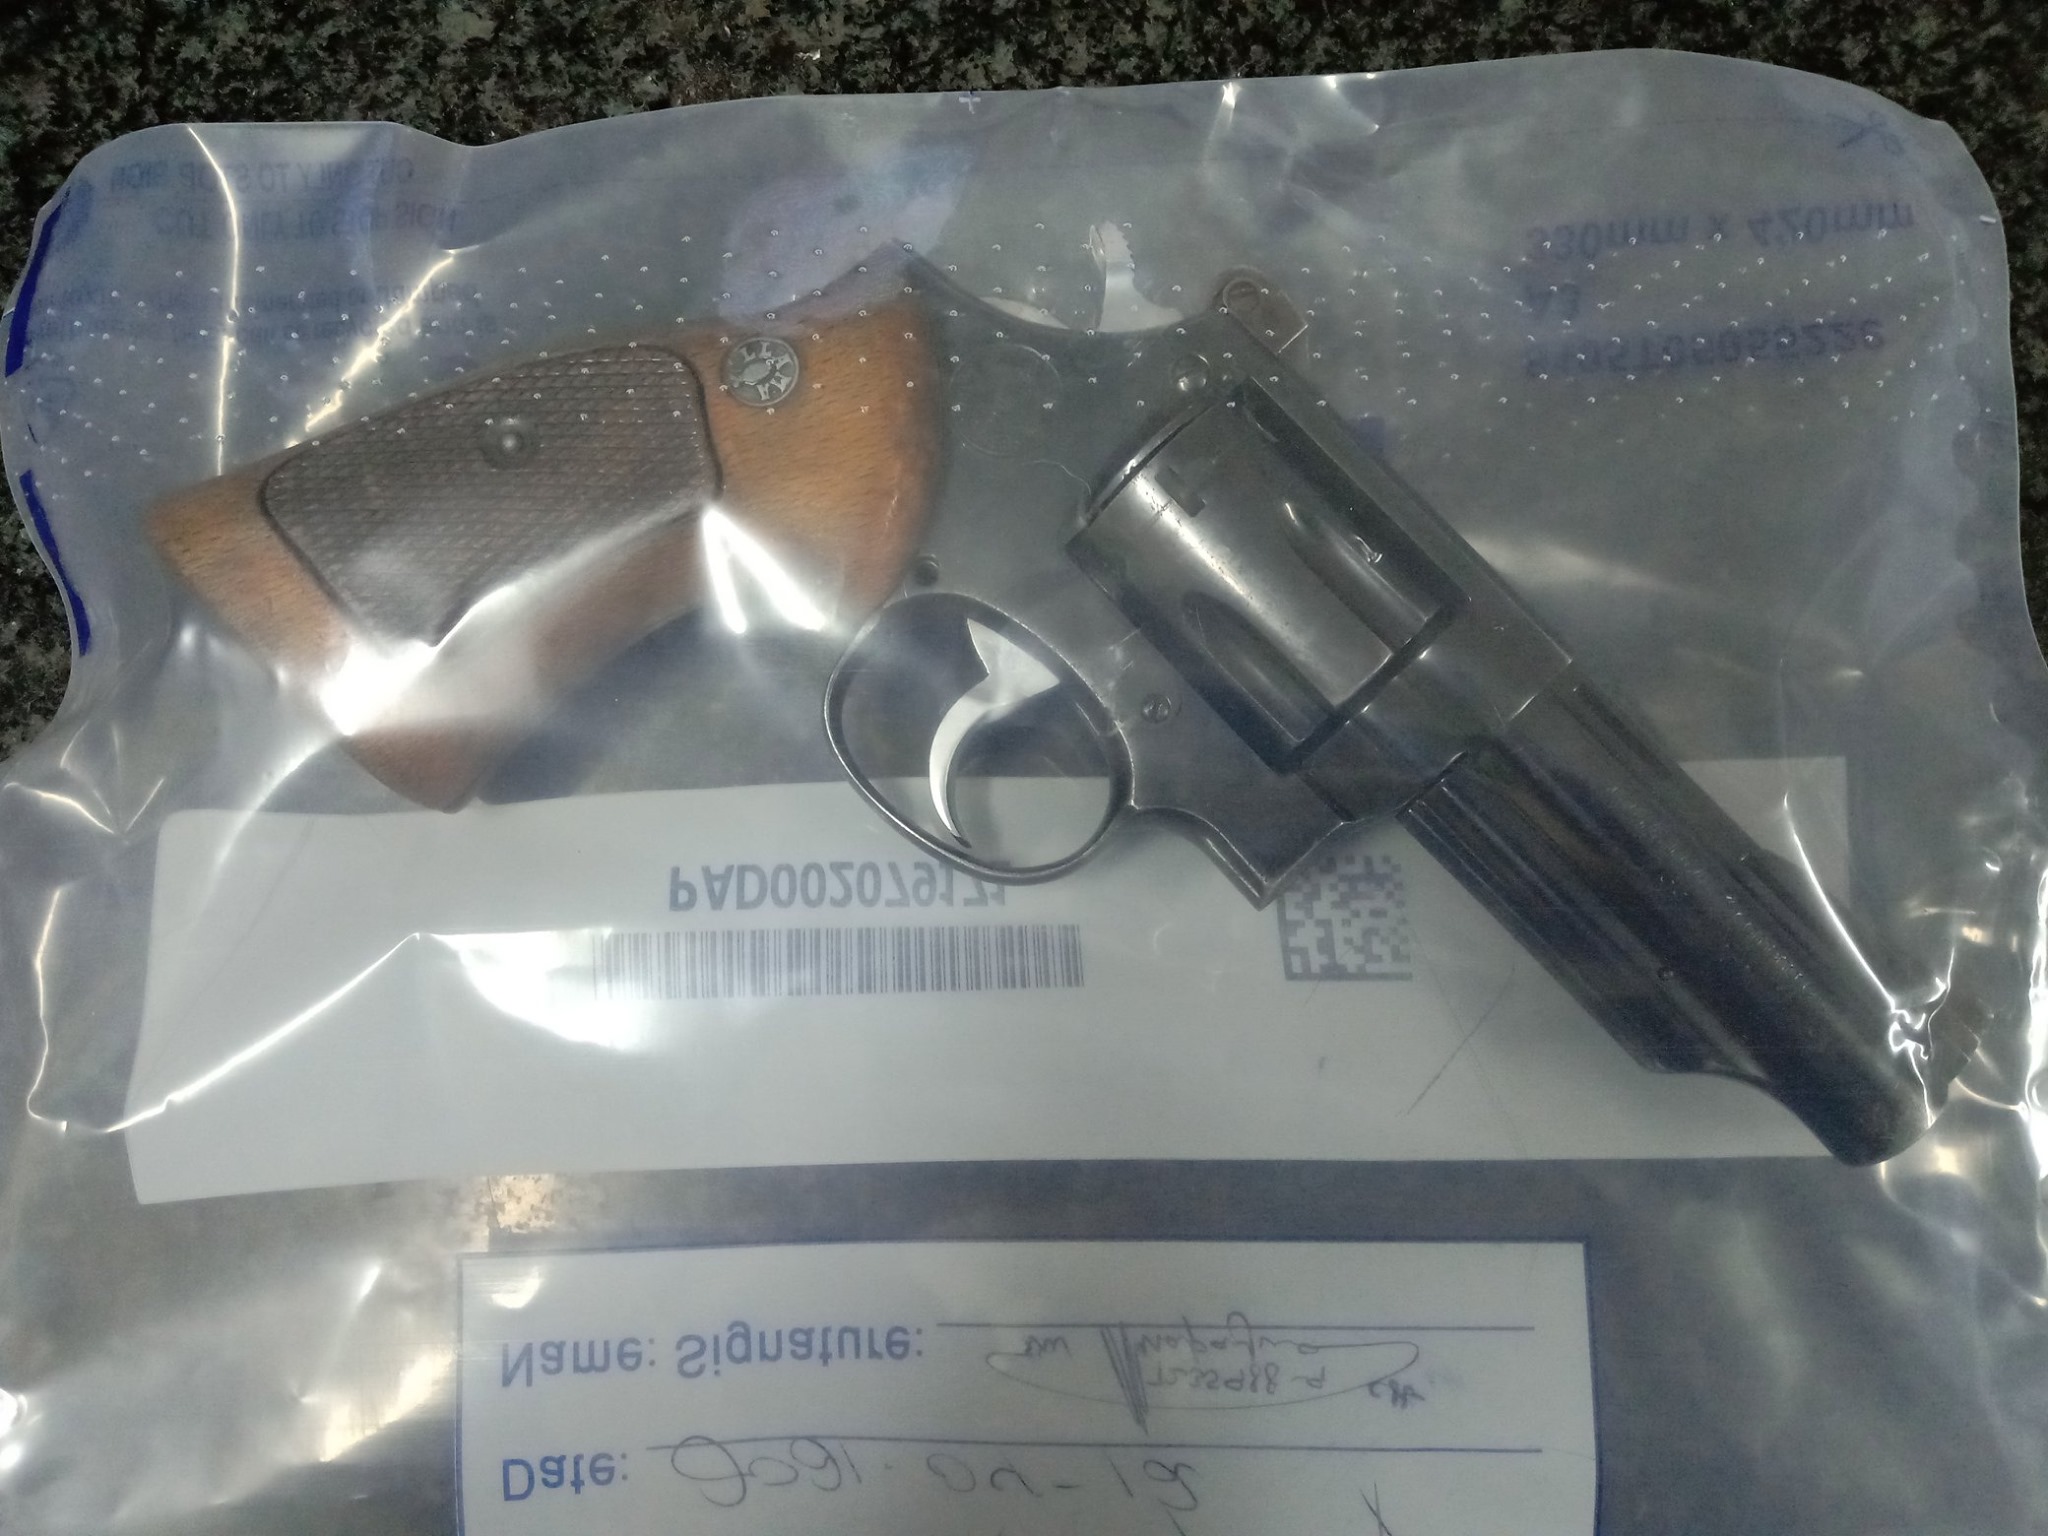 Five suspects arrested with a firearms, two with hijacked vehicle and one for attempted murder